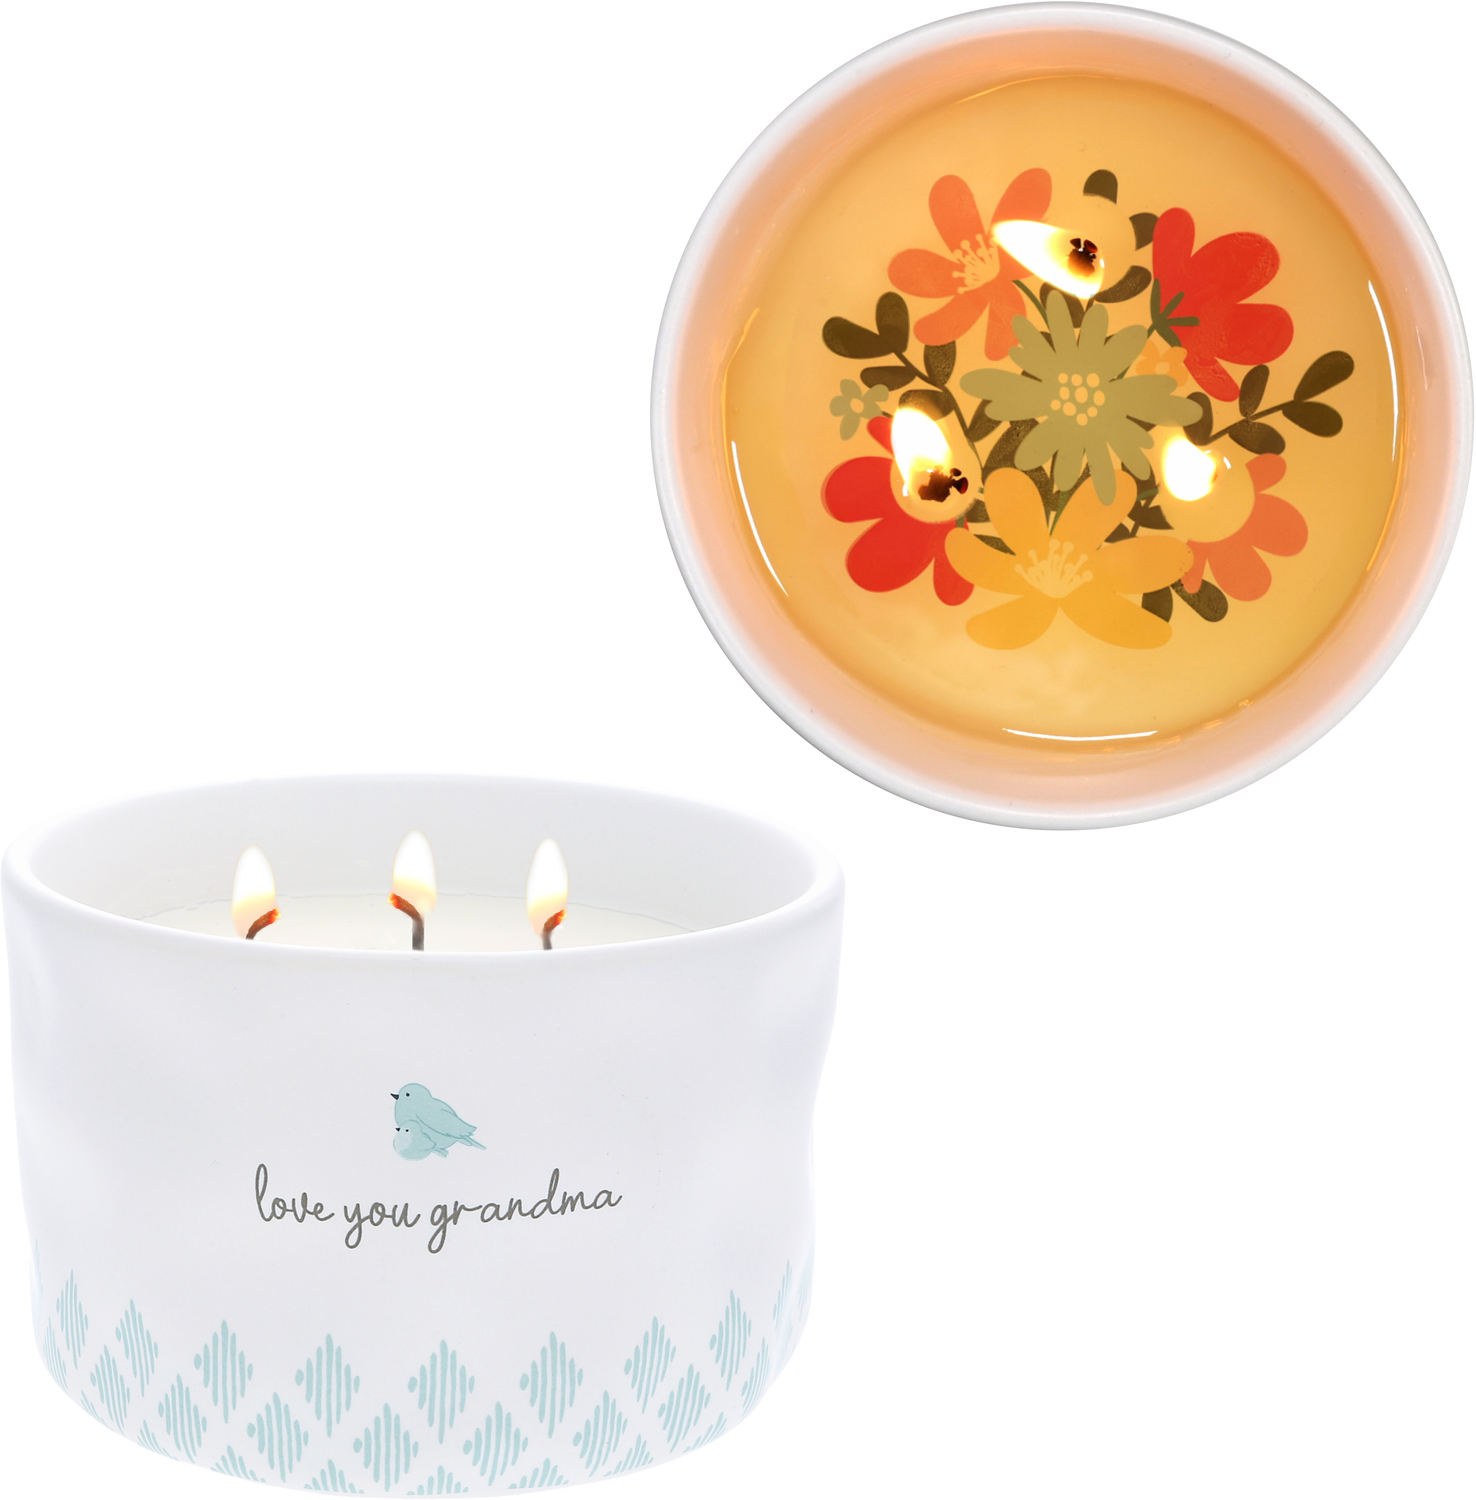 Love You Grandma by Grateful Garden - Love You Grandma - 12 oz - 100% Soy Wax Reveal Triple Wick Candle
Scent: Tranquility